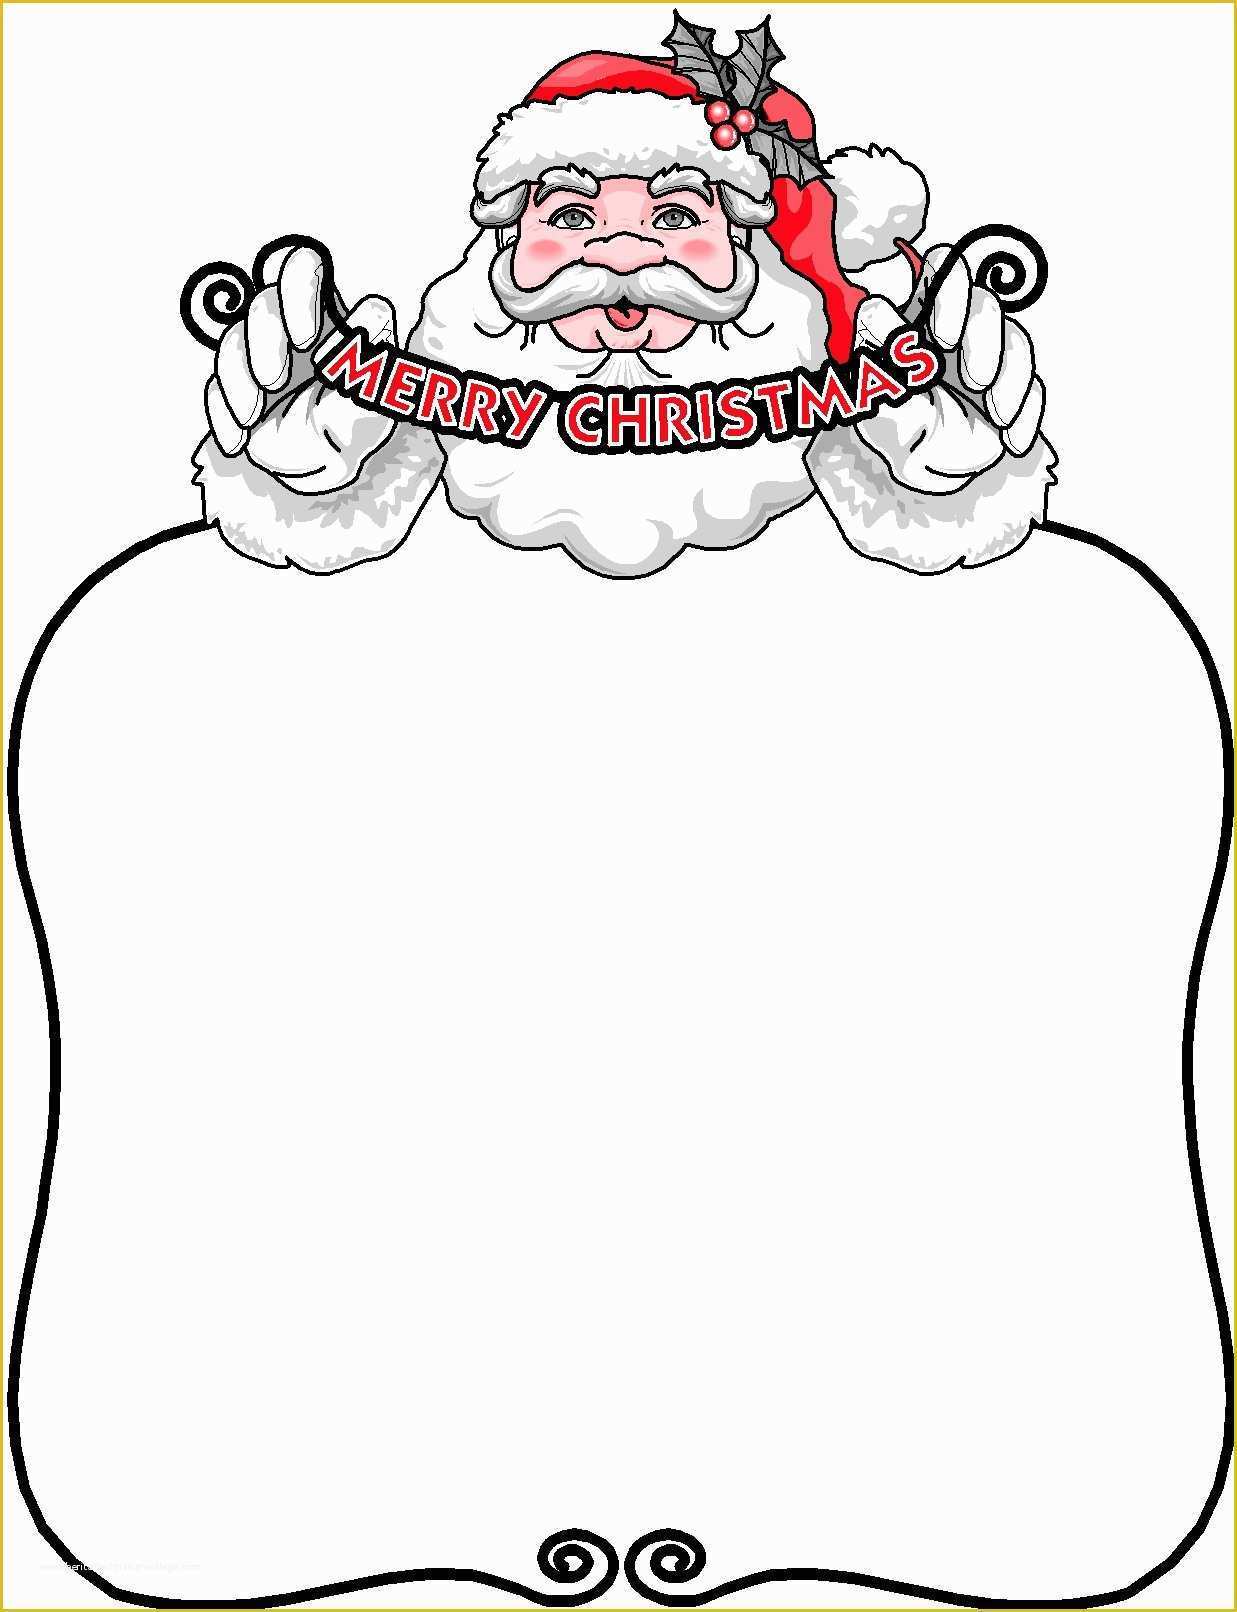 free-letter-to-santa-template-word-of-from-the-desk-of-santa